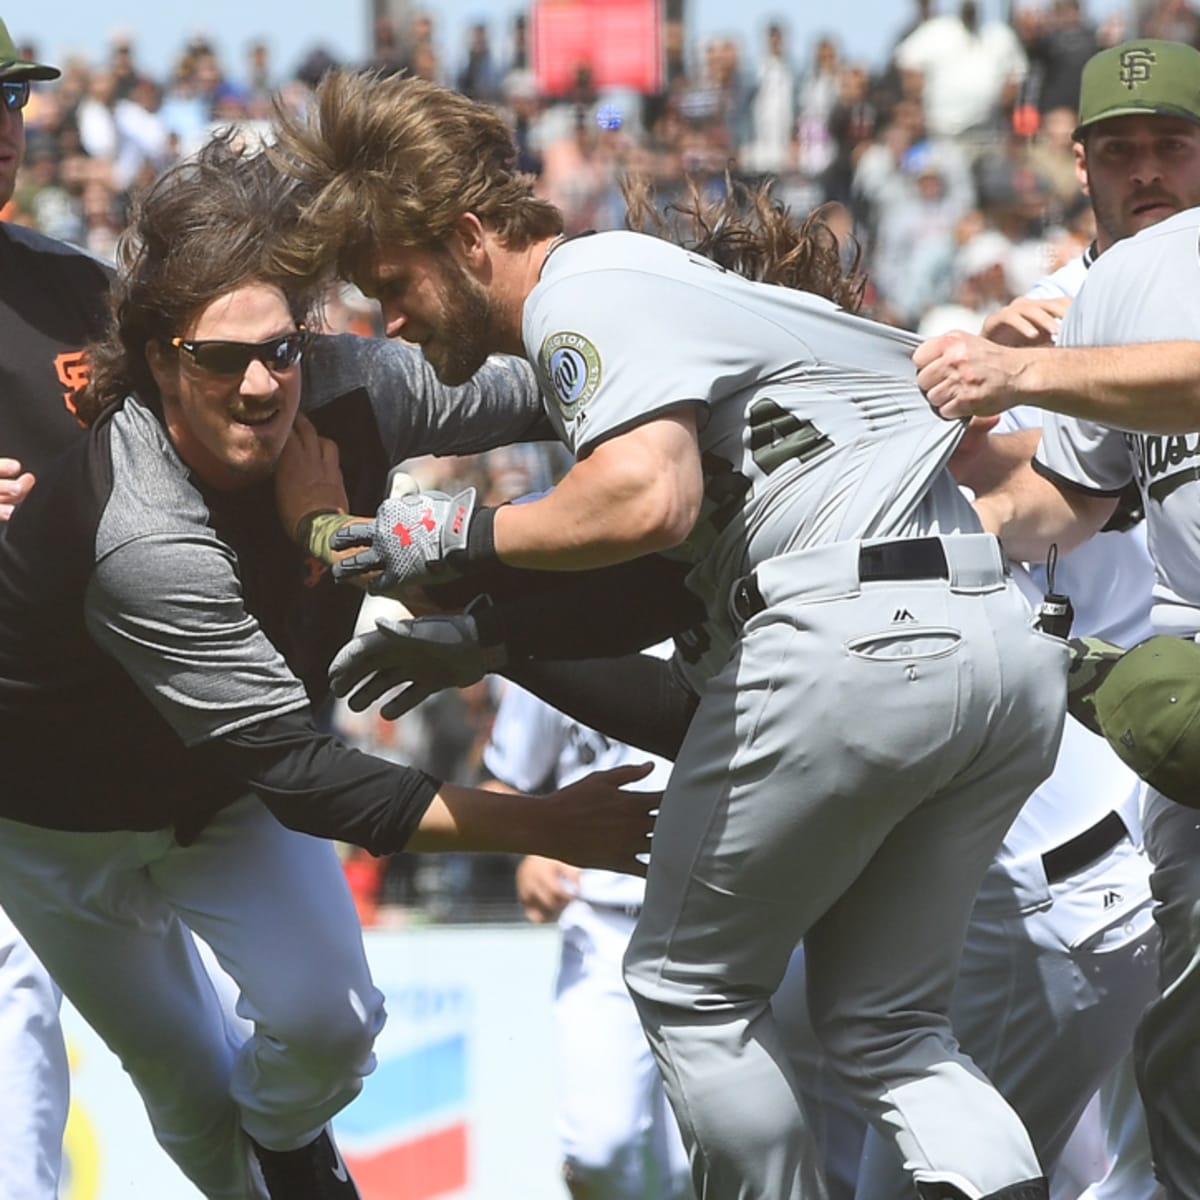 Giants' Michael Morse sustained concussion in brawl, is placed on